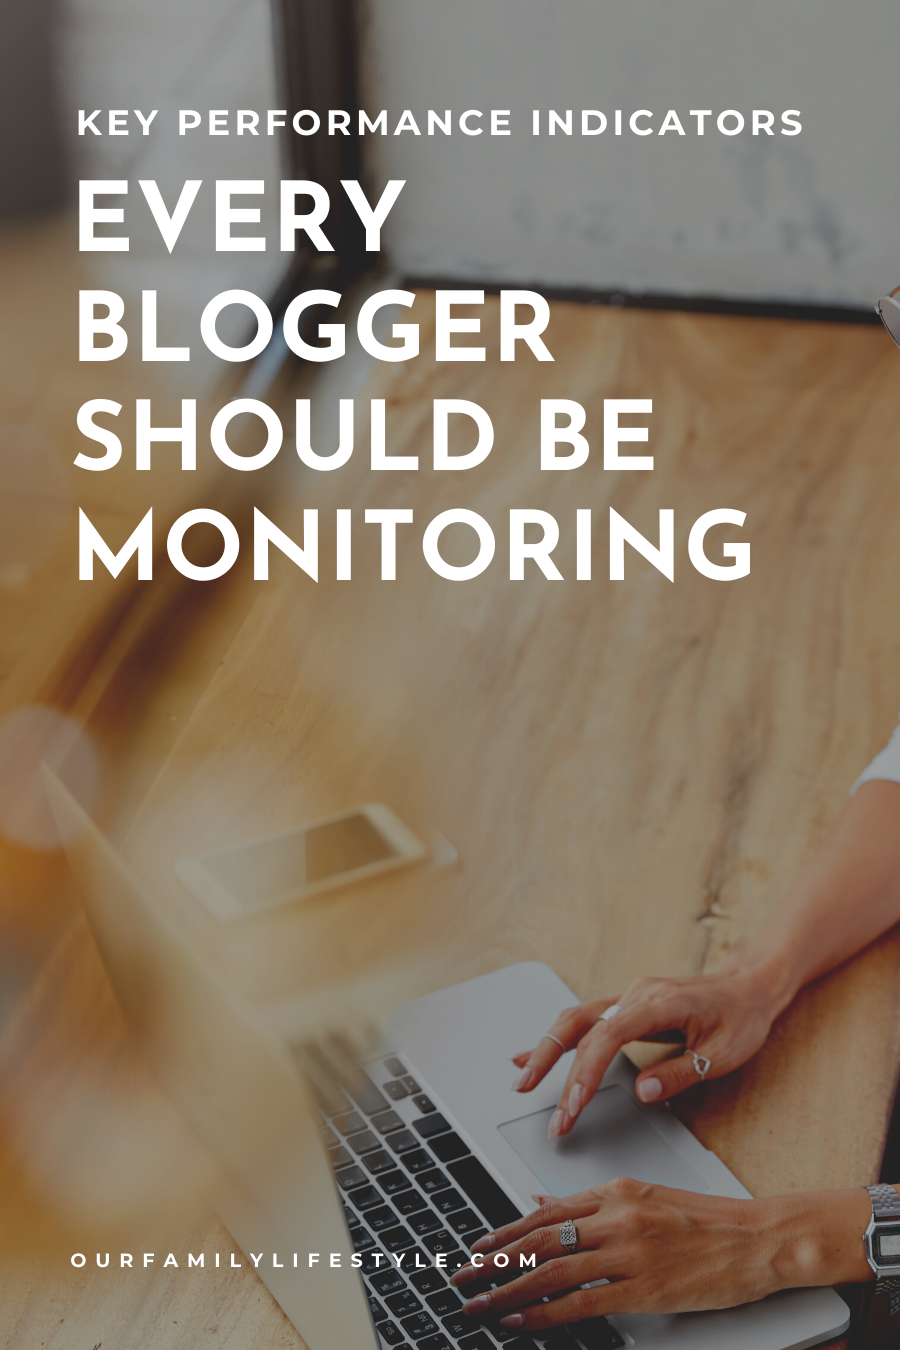 The Key Performance Indicators Every Blogger Should Be Monitoring